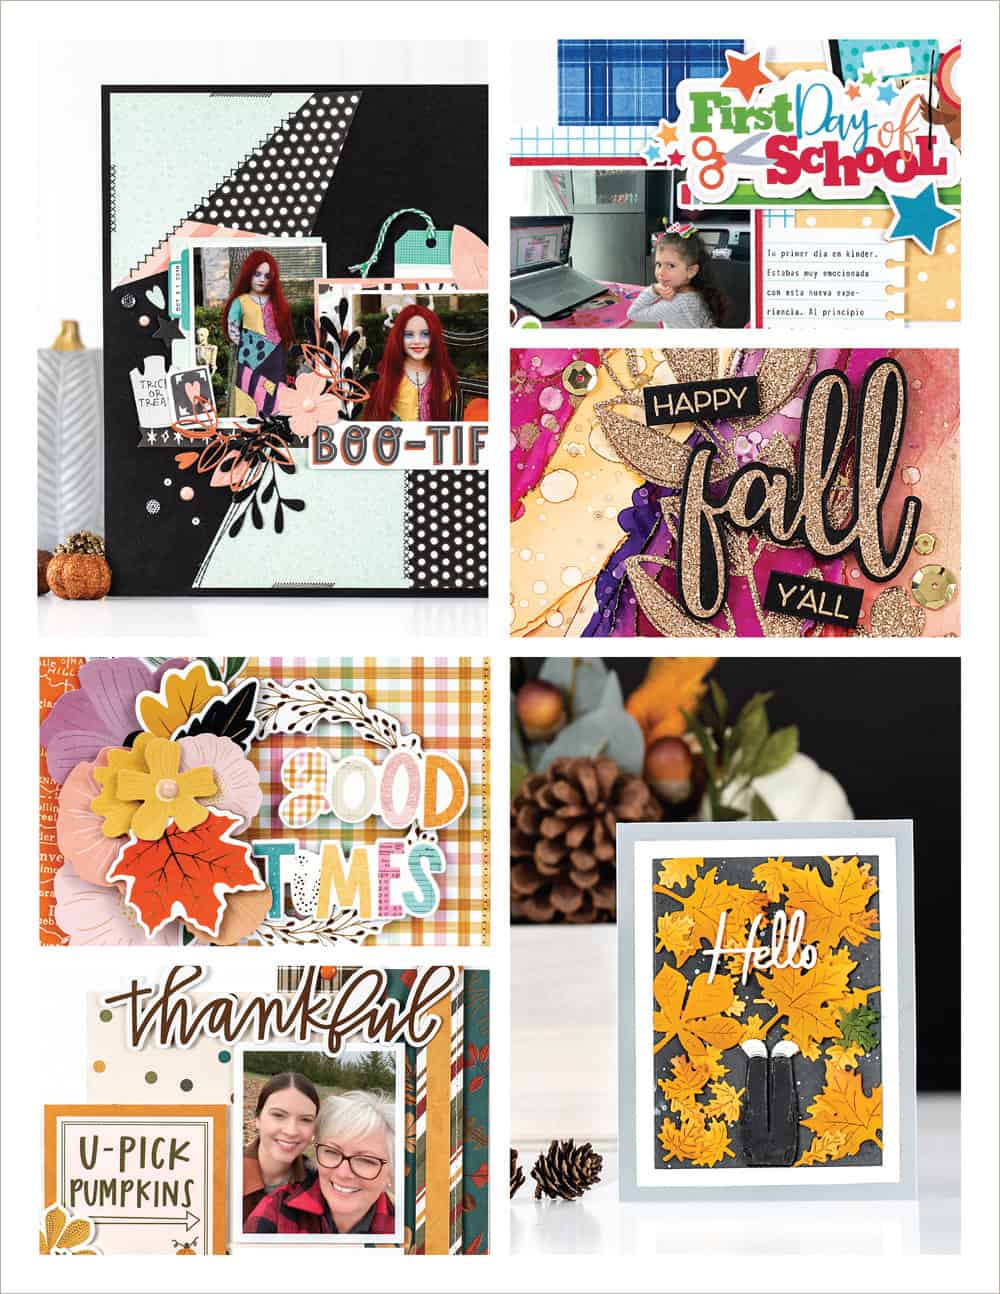 Scrapbook & Cards Today magazine - Fall 2022 Issue Collage